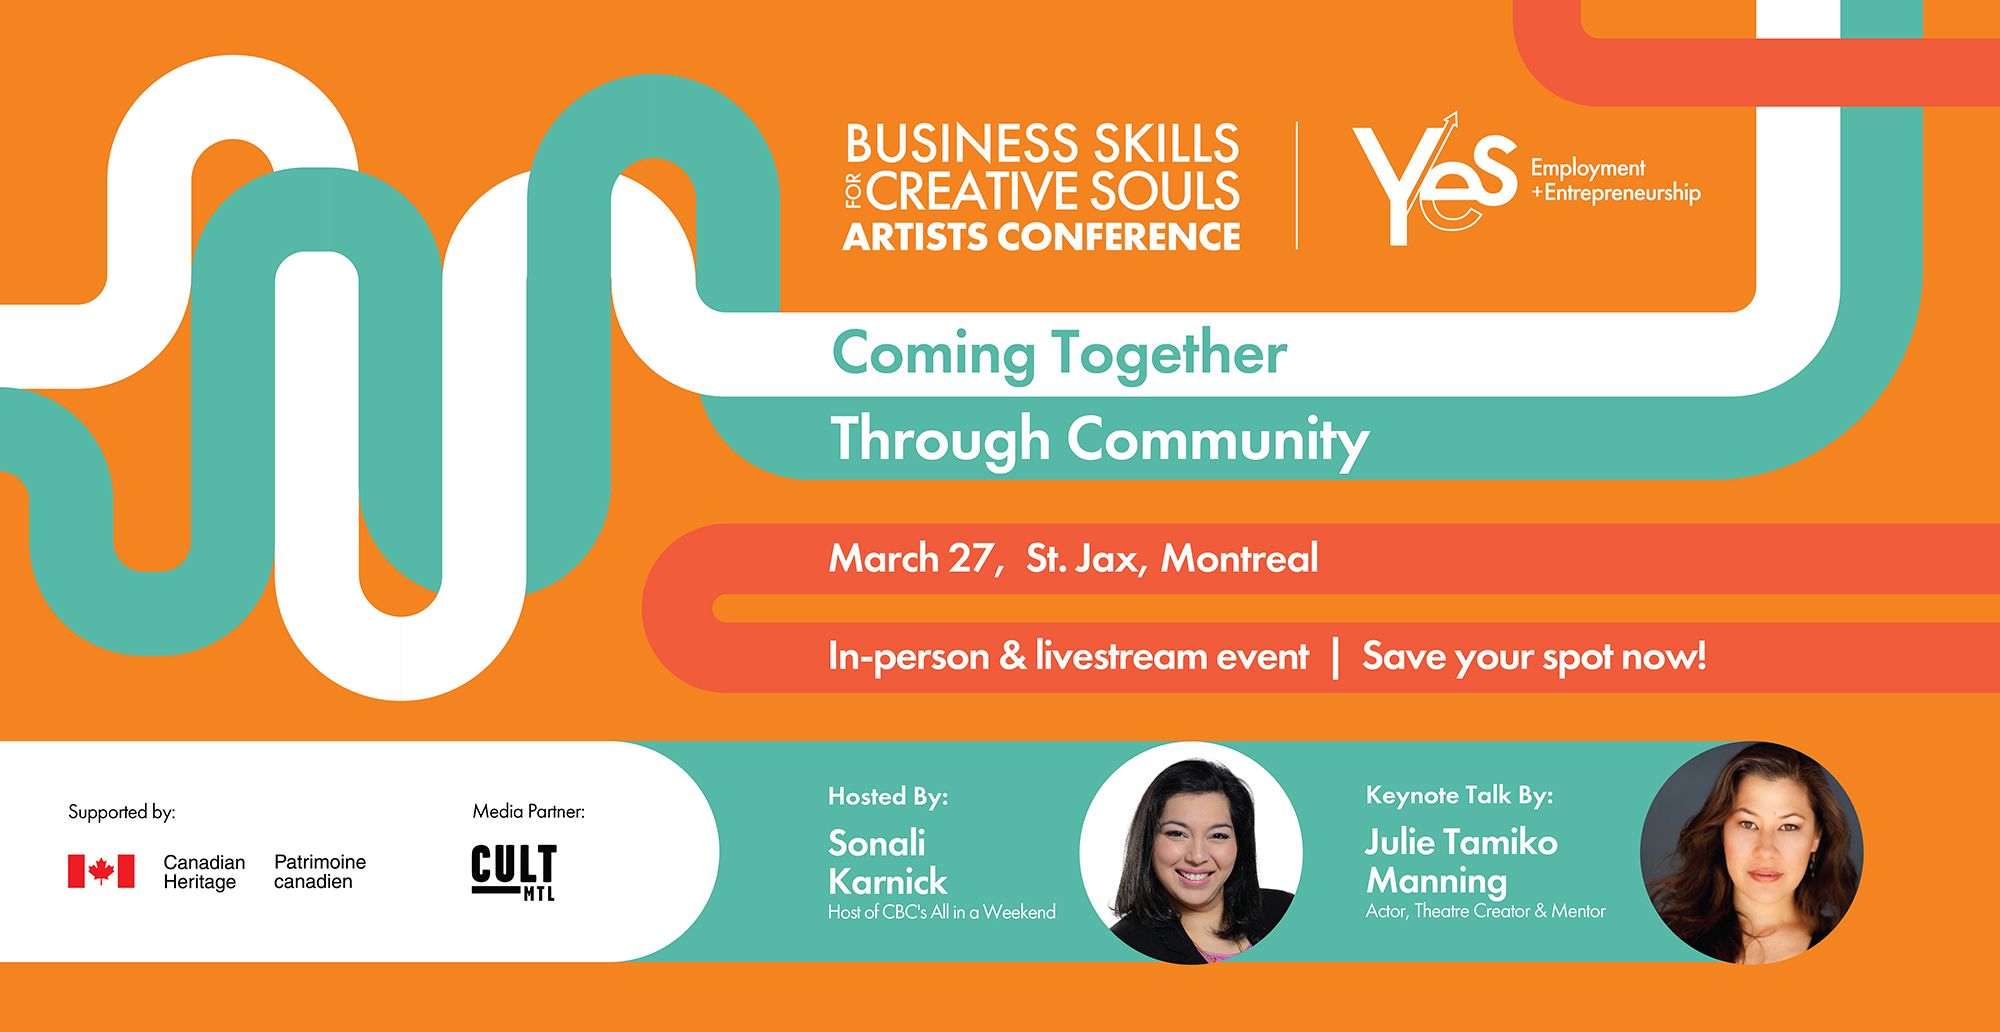 YES Employment + Entrepreneurship Business Skills for Creative Souls Artists Conference